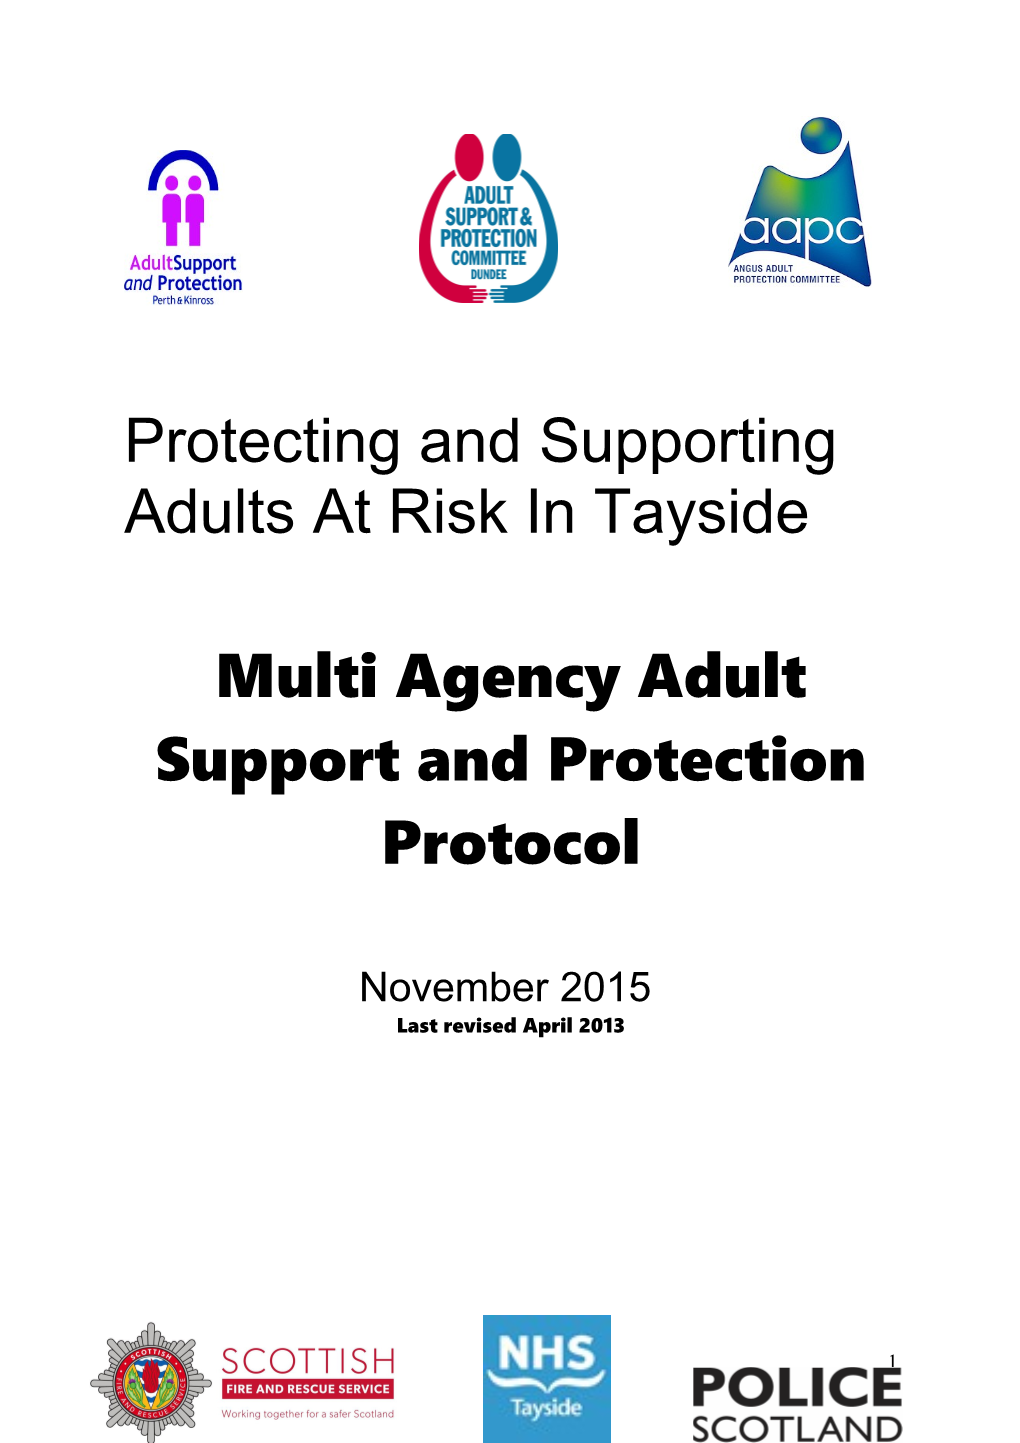 Protecting and Supporting Adults at Risk in Tayside